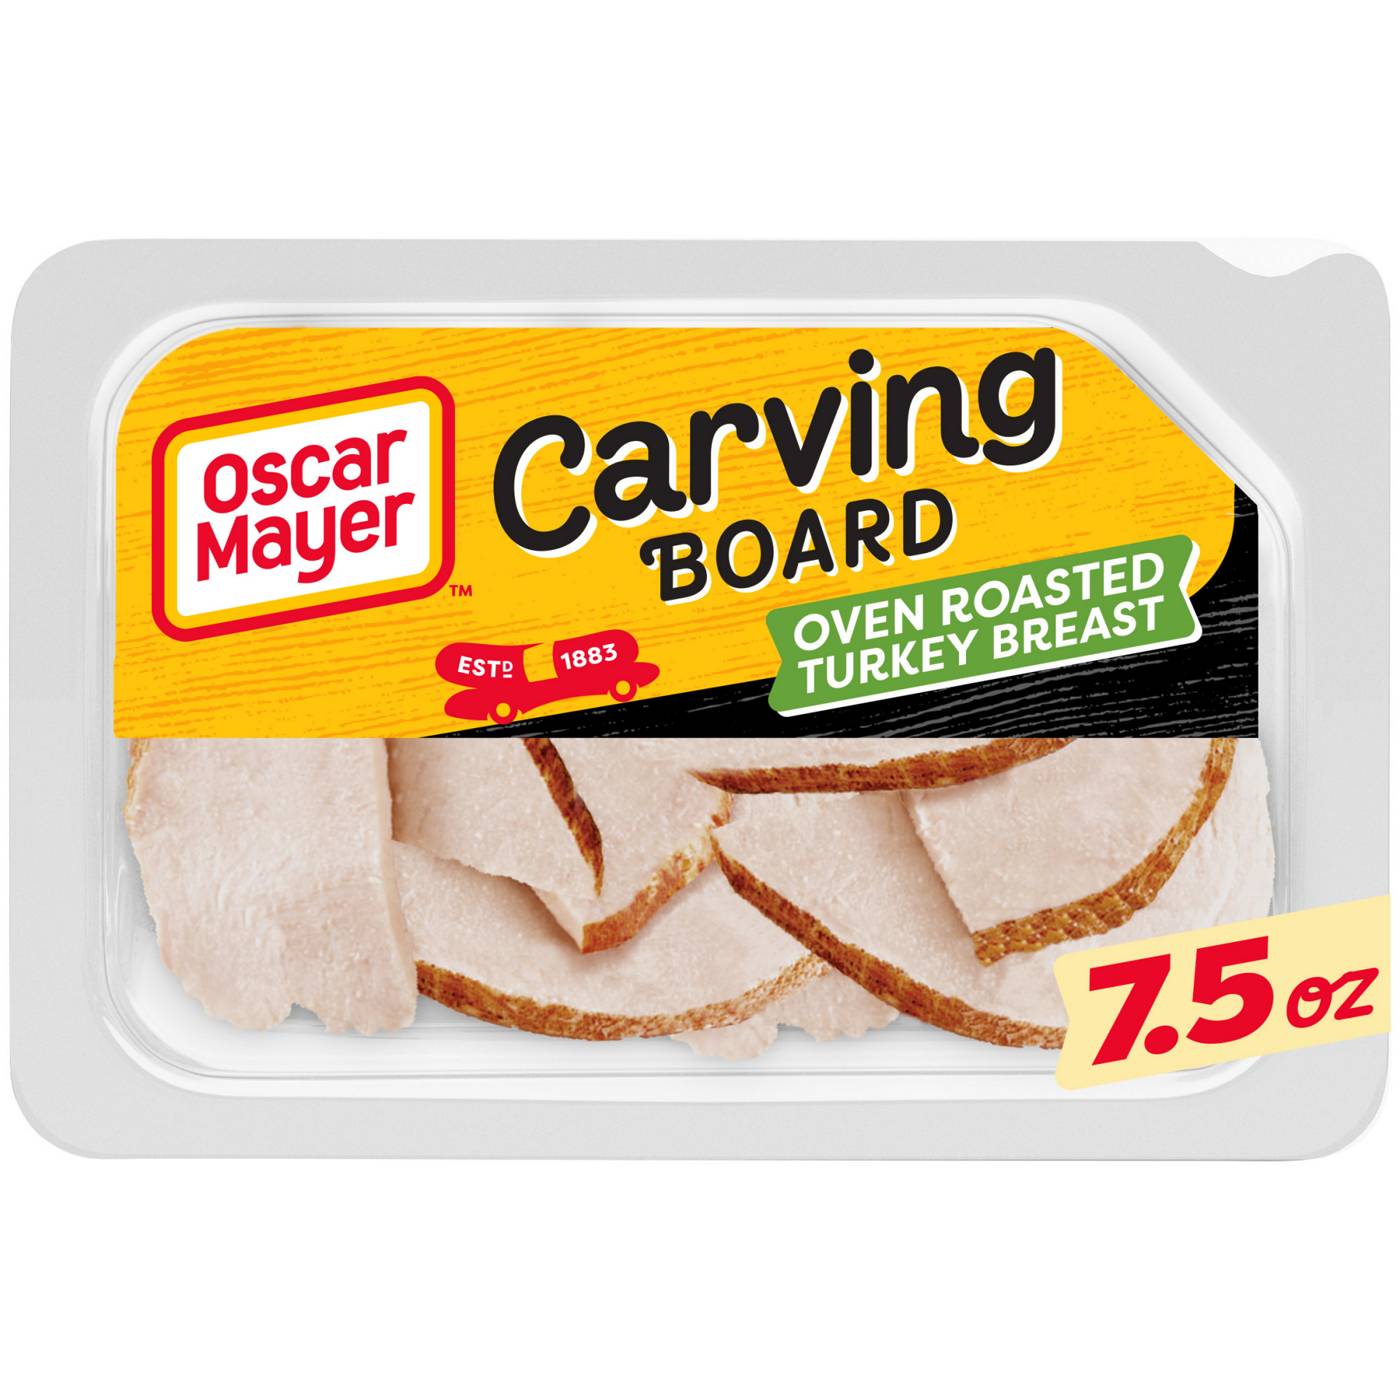 Oscar Mayer Carving Board Oven Roasted Sliced Turkey Breast Lunch Meat; image 1 of 6